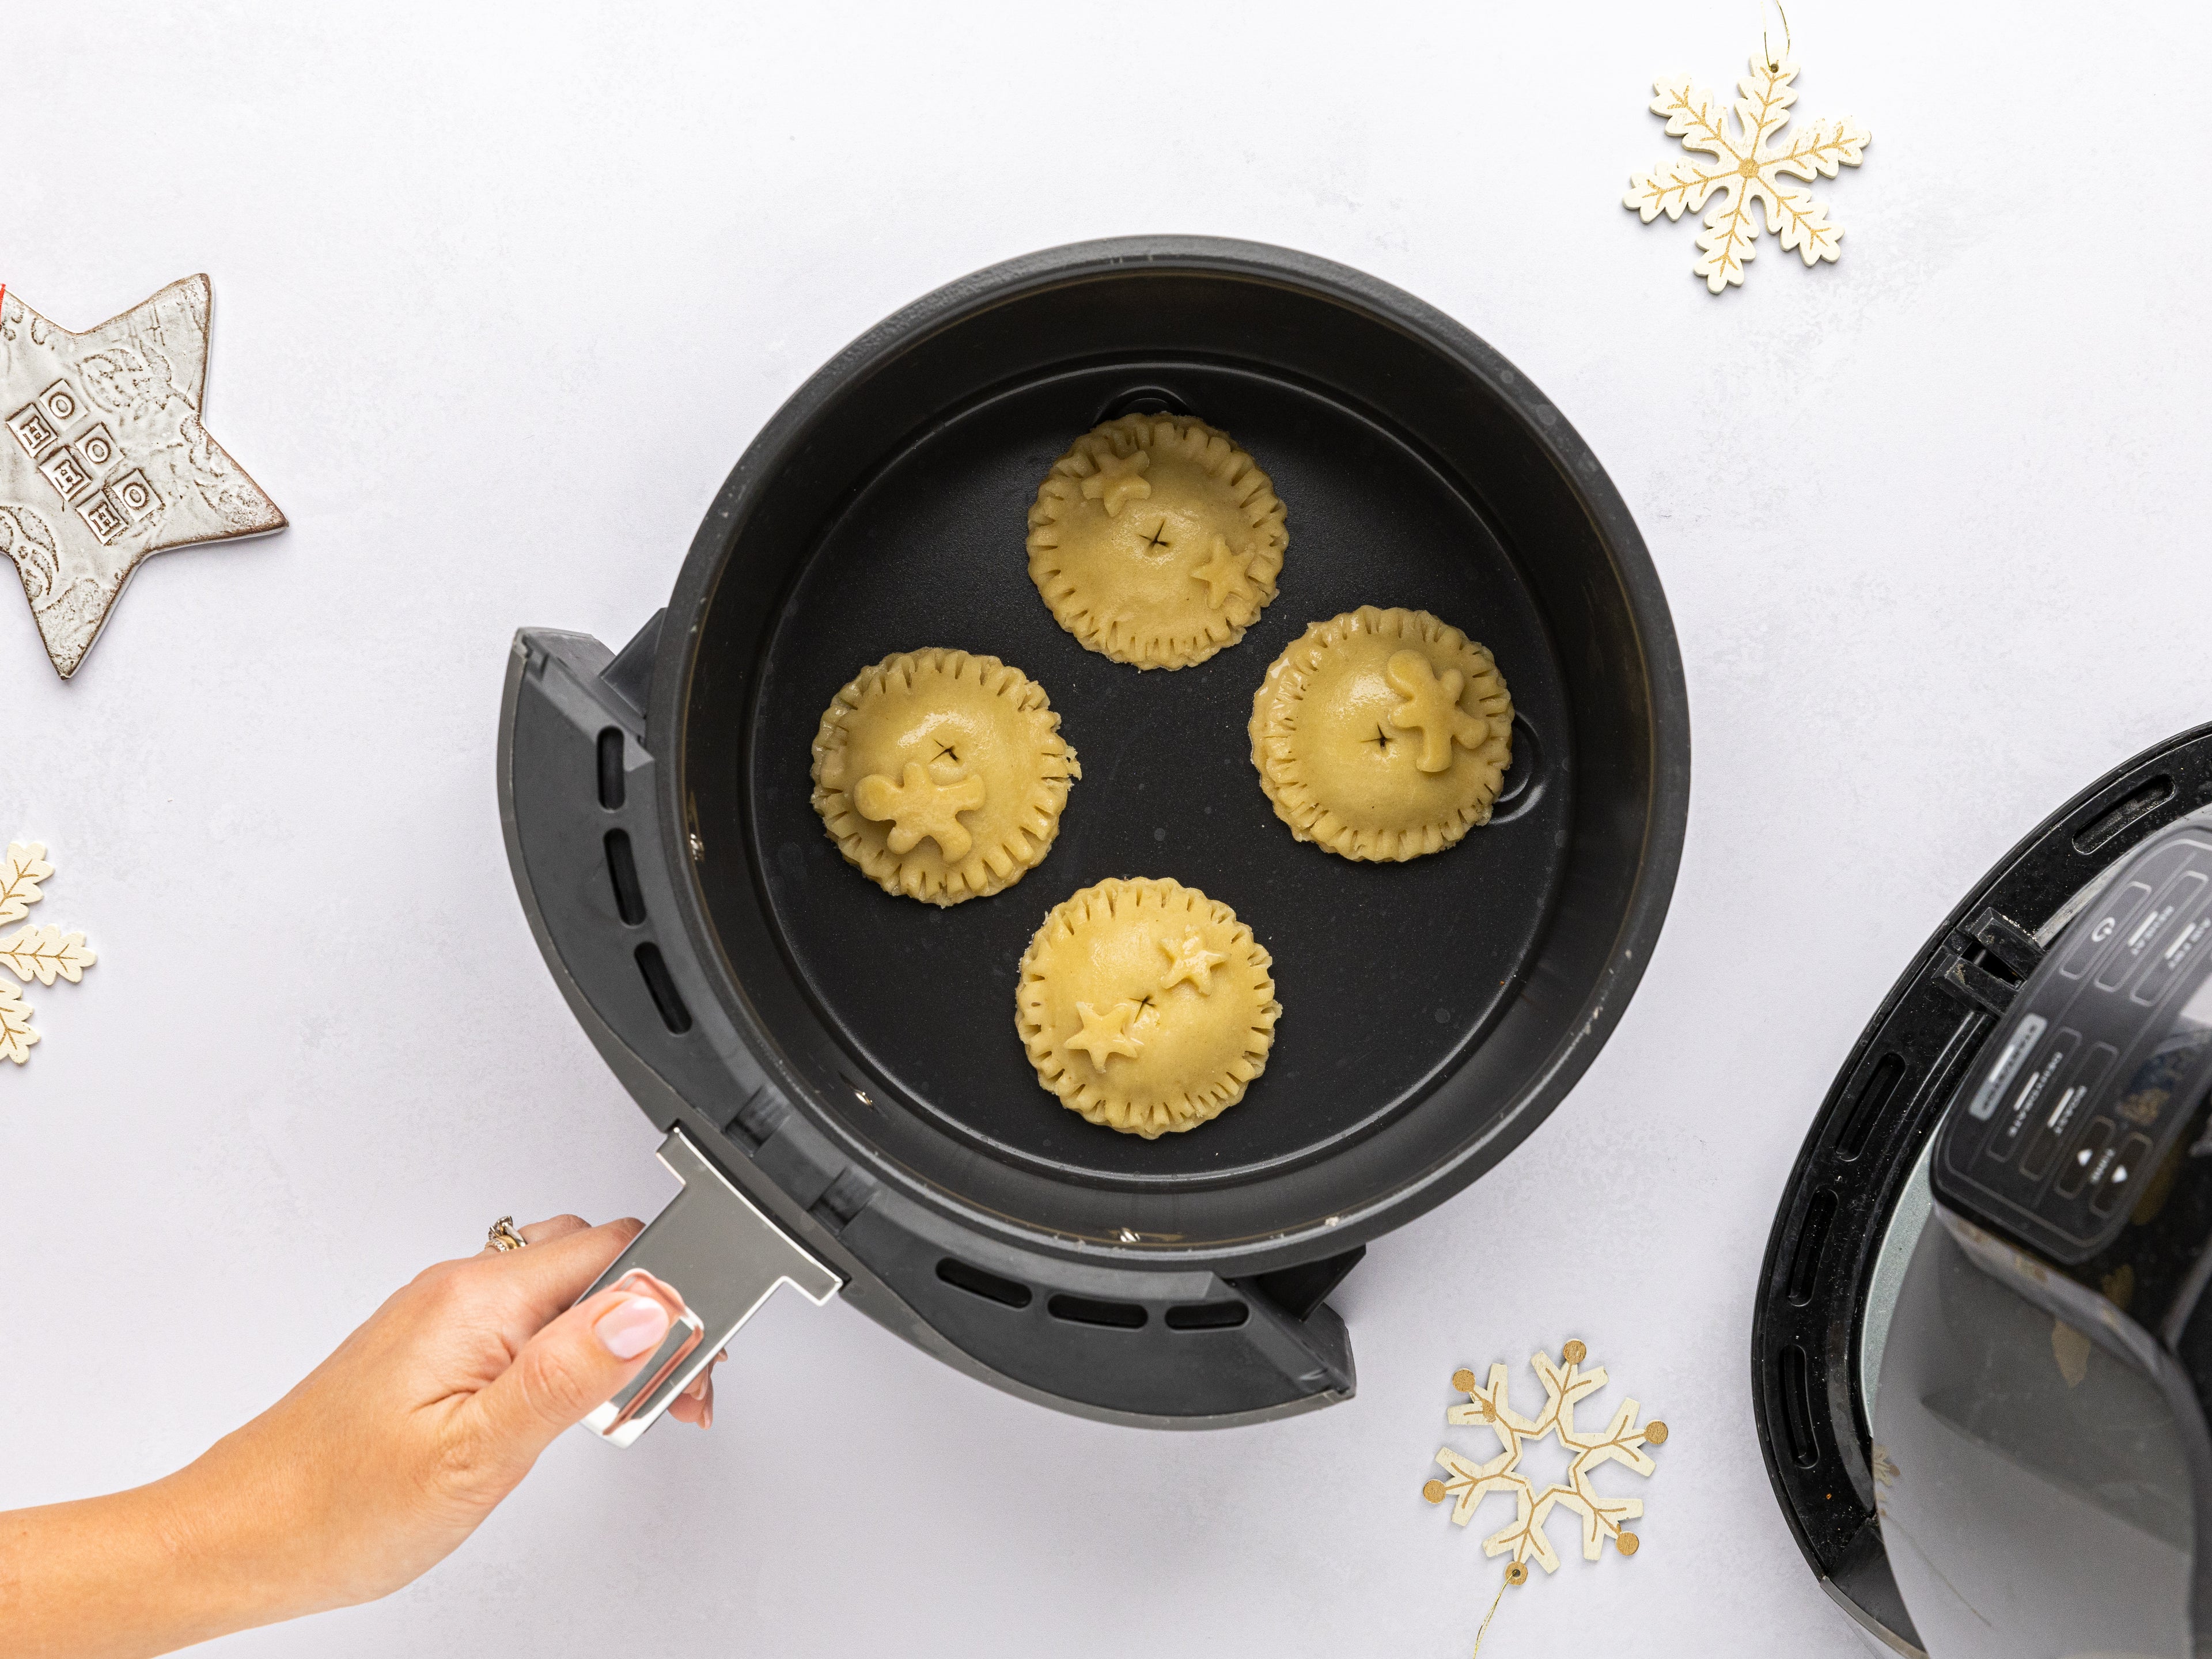 Four mince pies in an air fryer